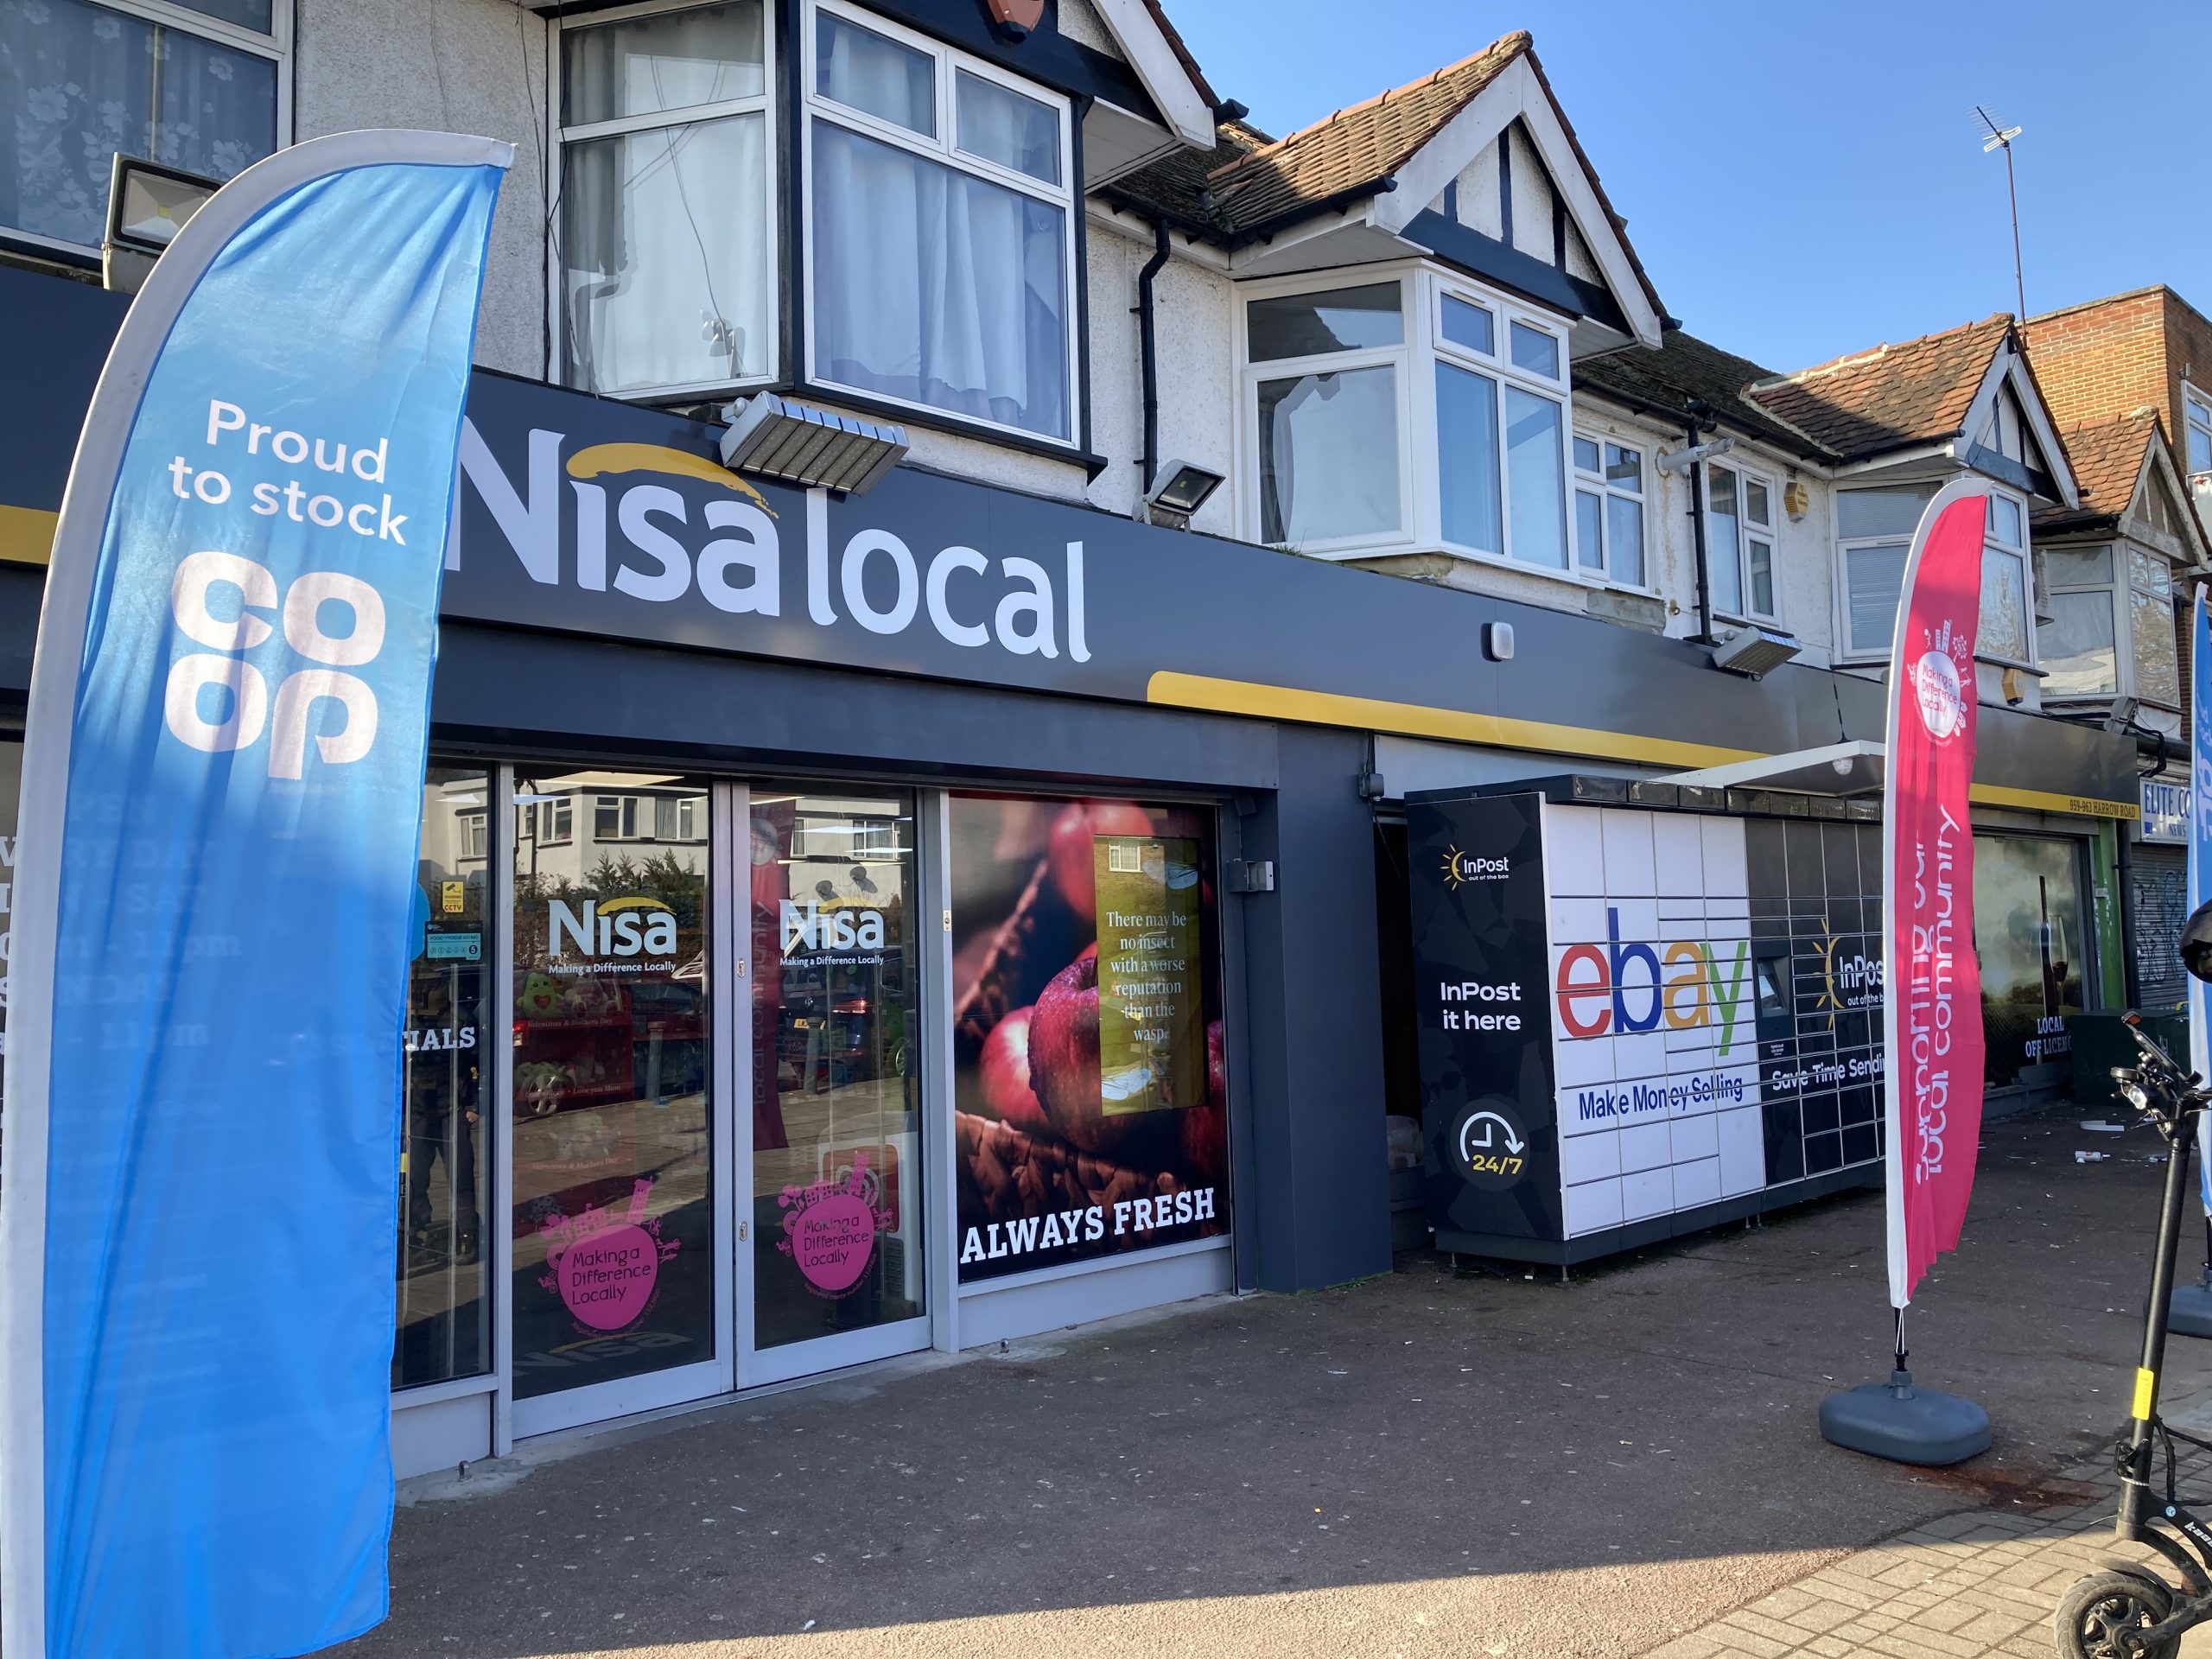 Nisa looks to recruit 400 more stores this year